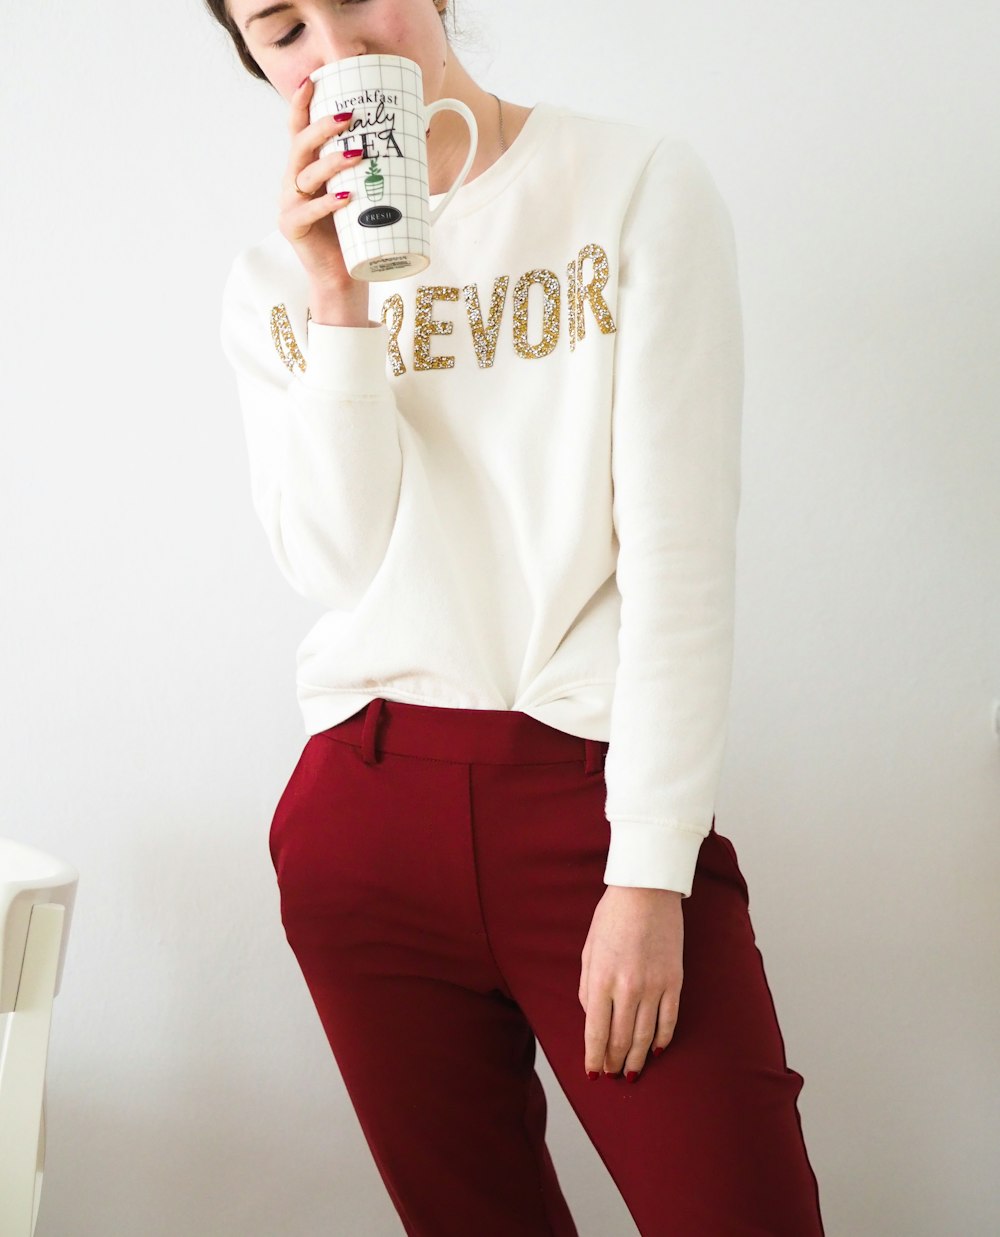 woman in white long sleeve shirt and red pants holding white ceramic mug